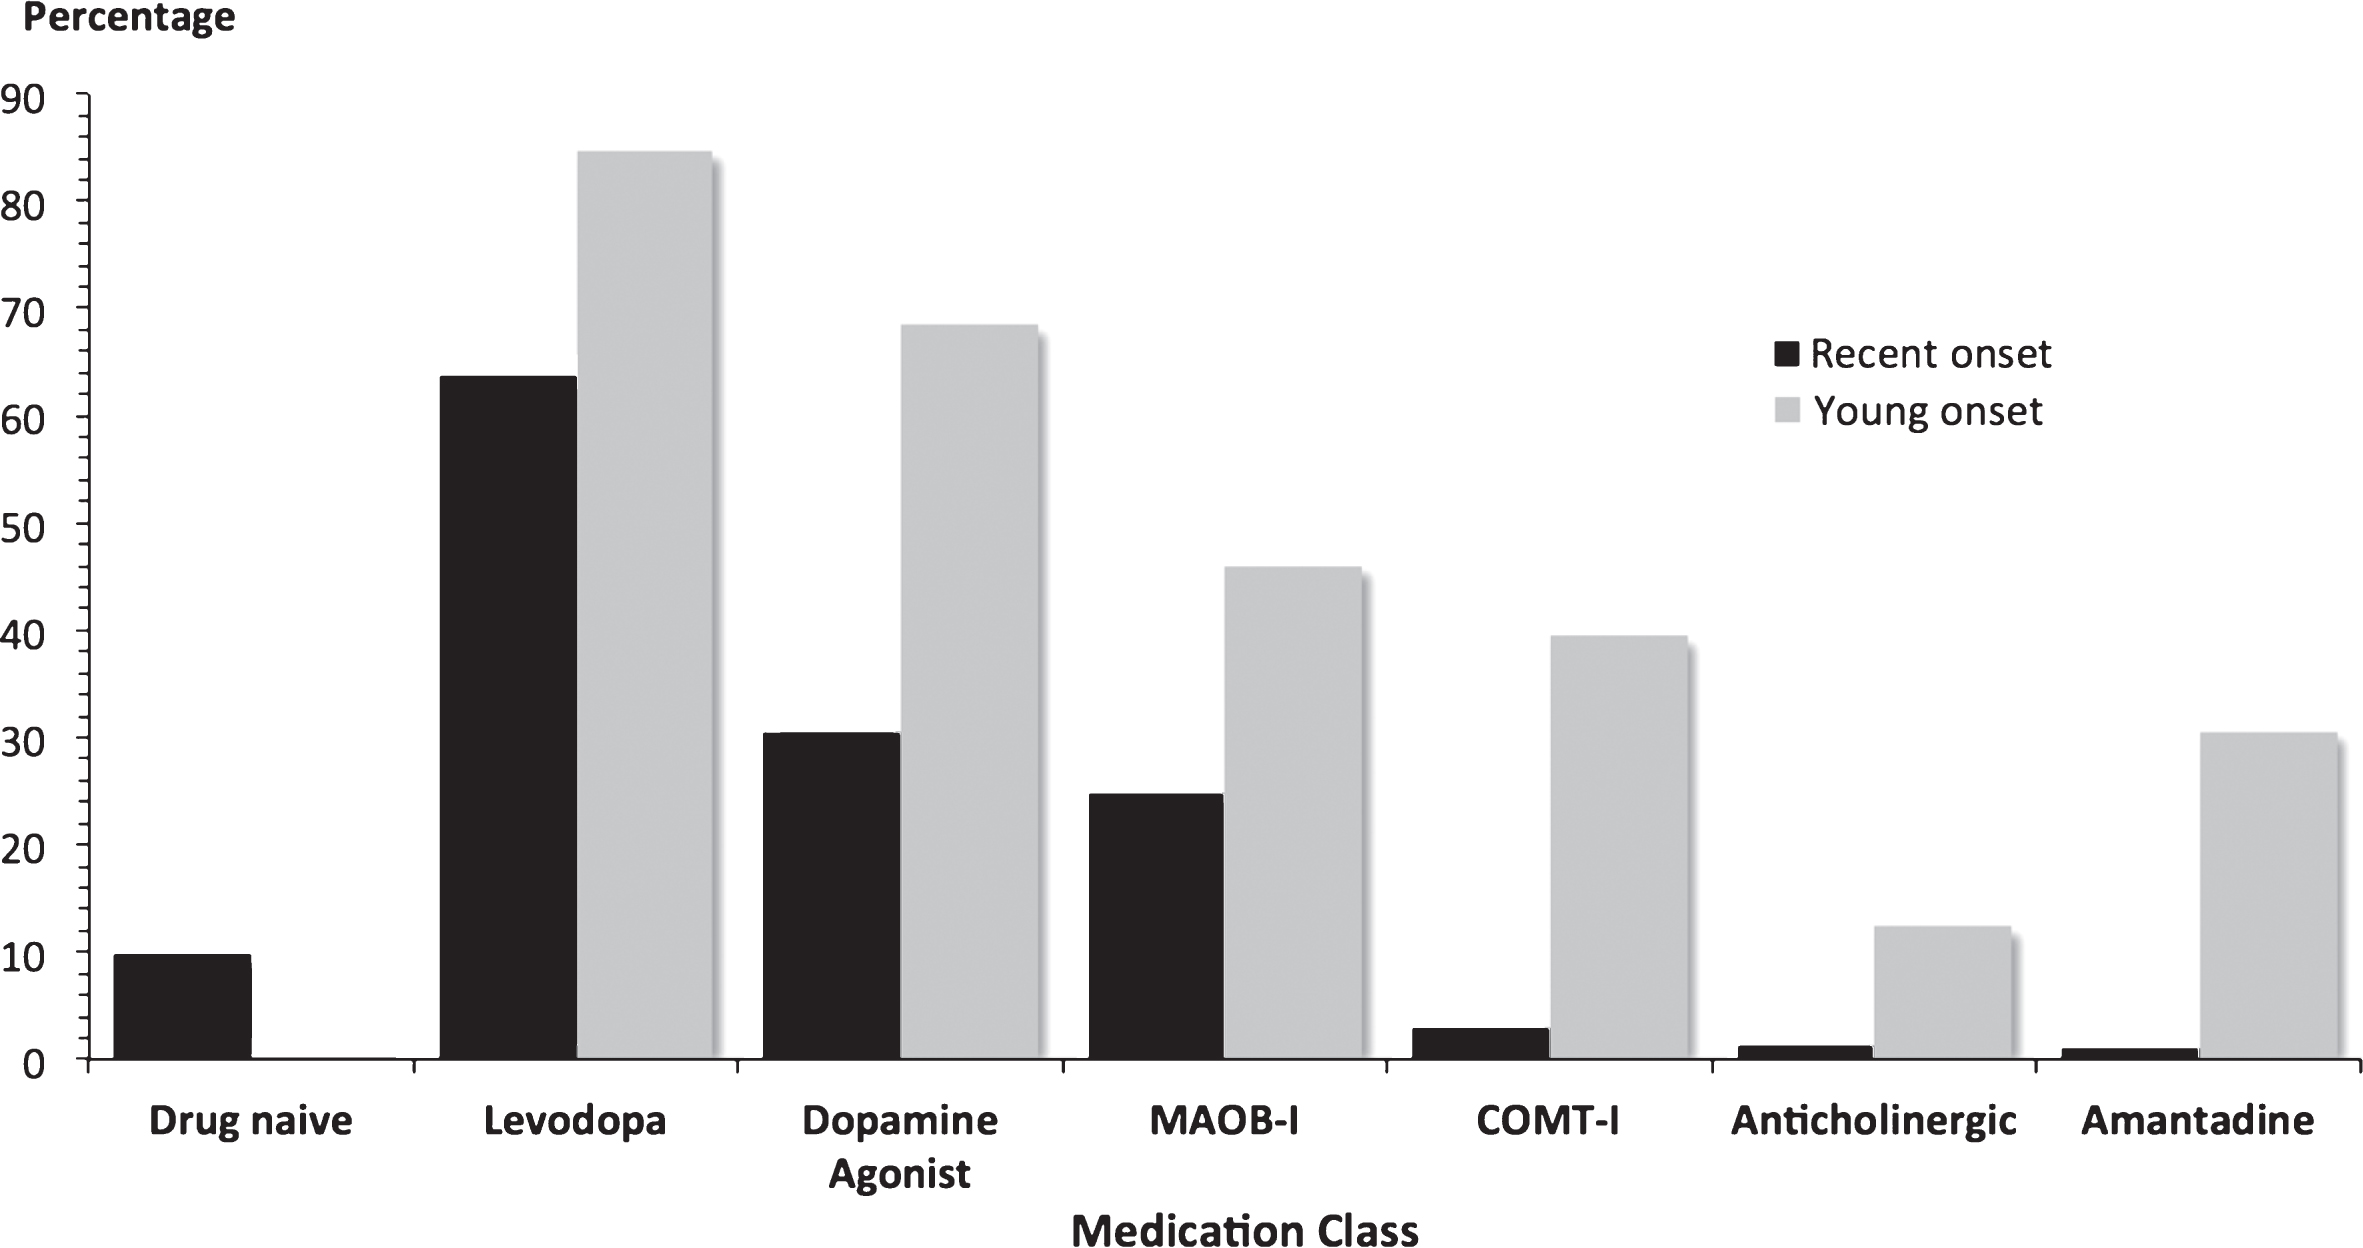 Antiparkinson medication at baseline in 2247 PD patients. Most patients were already on antiparkinson medication at recruitment. Young onset cases had a longer disease duration than recent onset cases, which will affect usage rates and the proportions on more than one drug class. MAOB-I = monoamine oxidase B inhibitor; COMT-I = catechol-O-methyl transferase inhibitor.